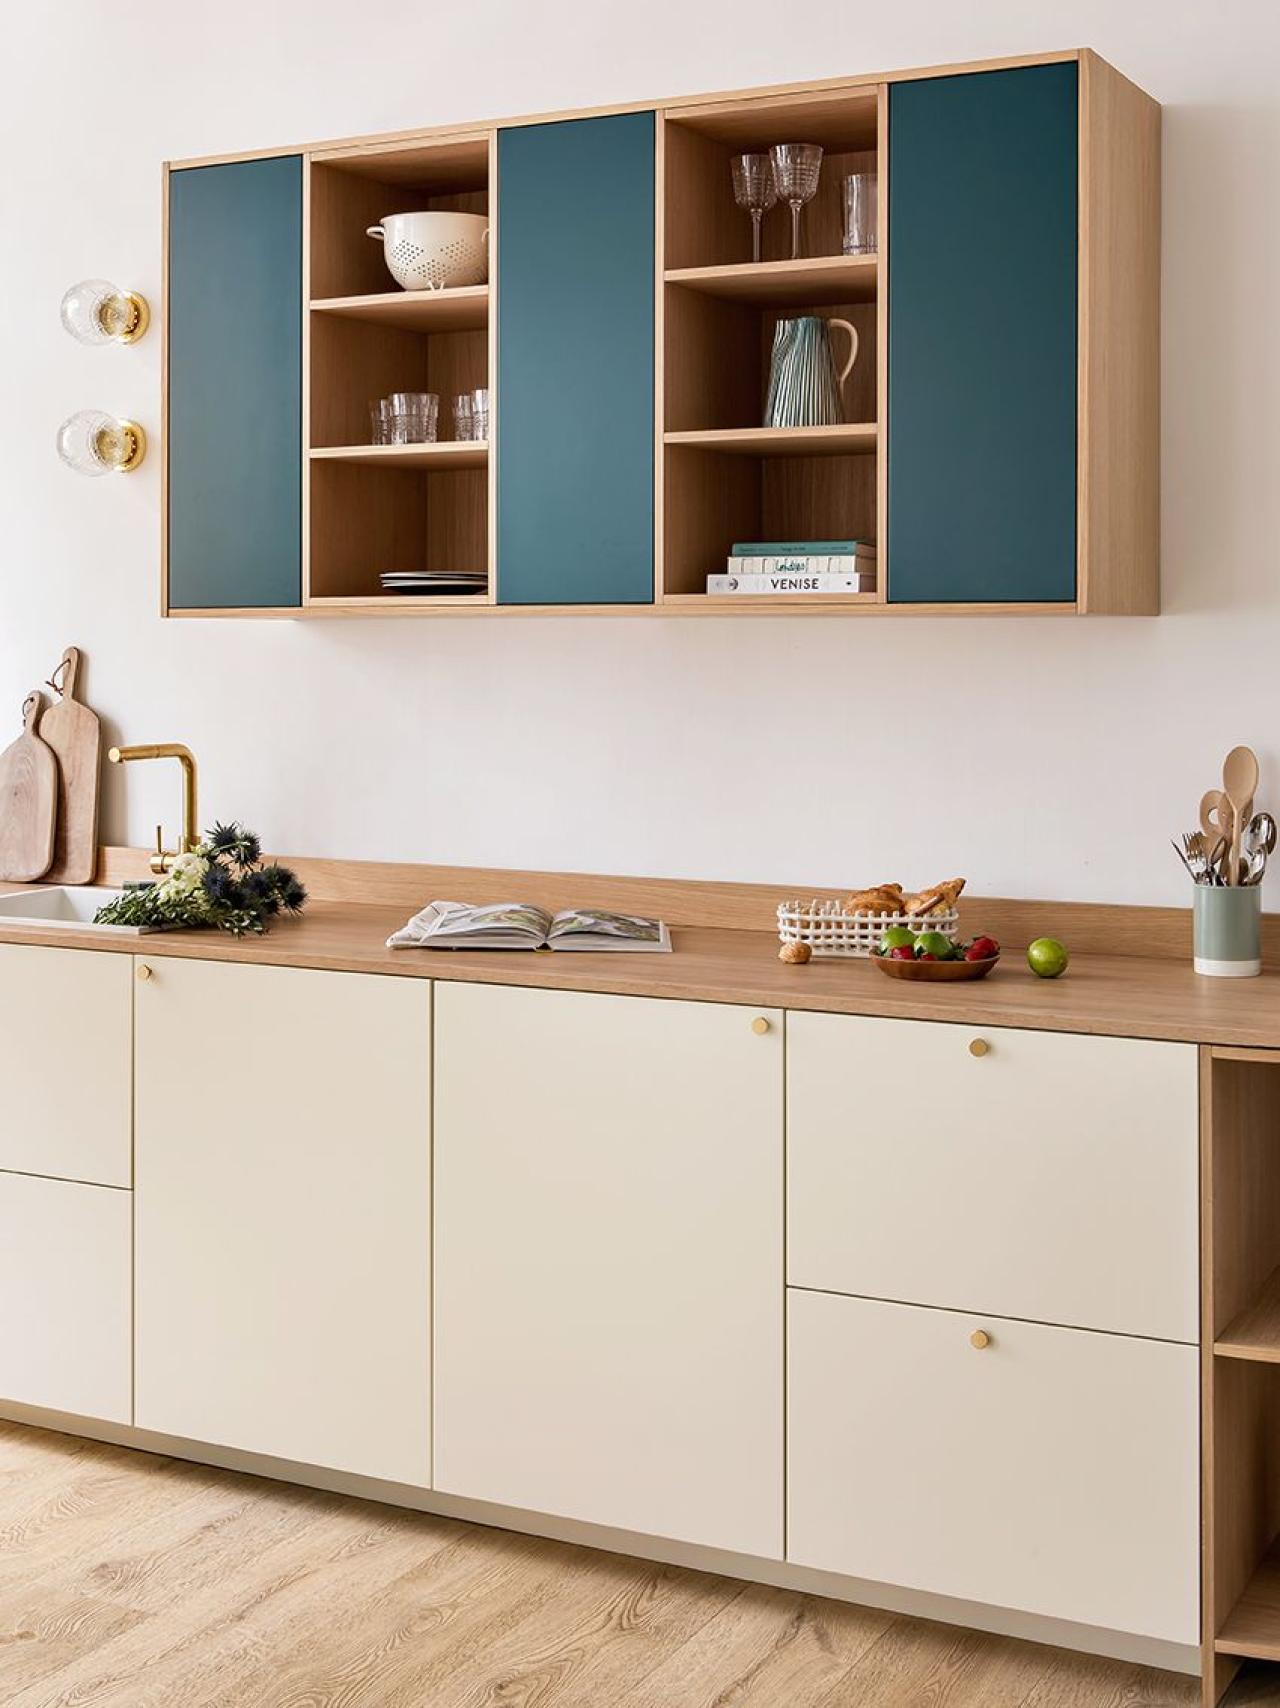 Ivoire and Vert sauvage kitchen, with open cabinets